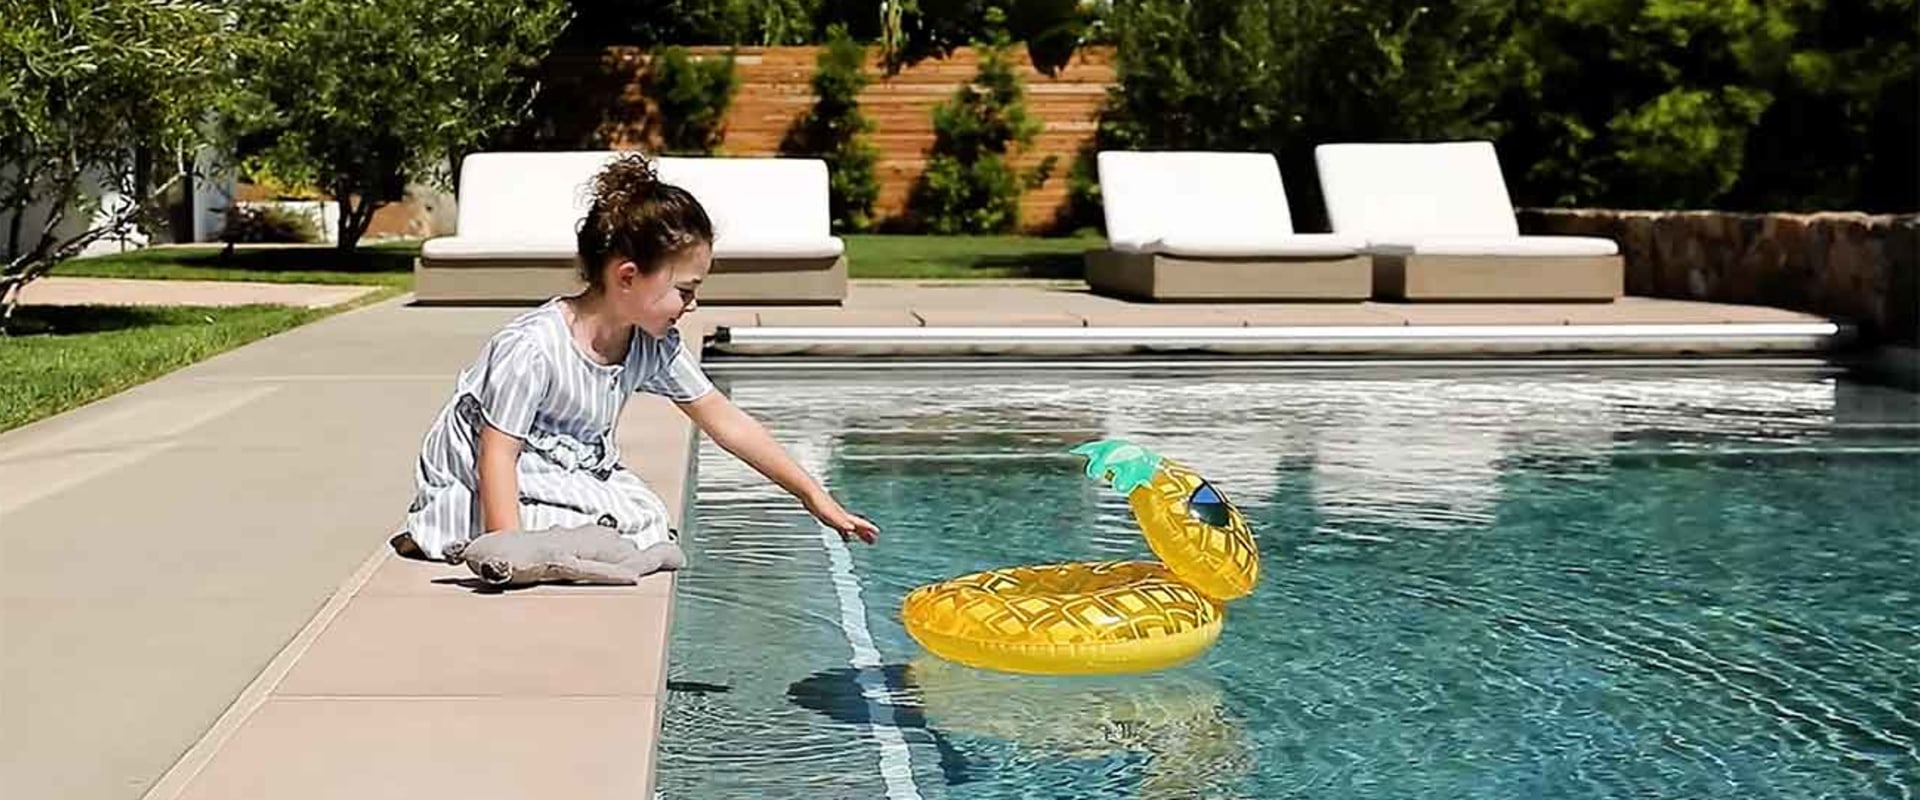 Checking Equipment for Proper Functionality Before Opening a Swimming Pool